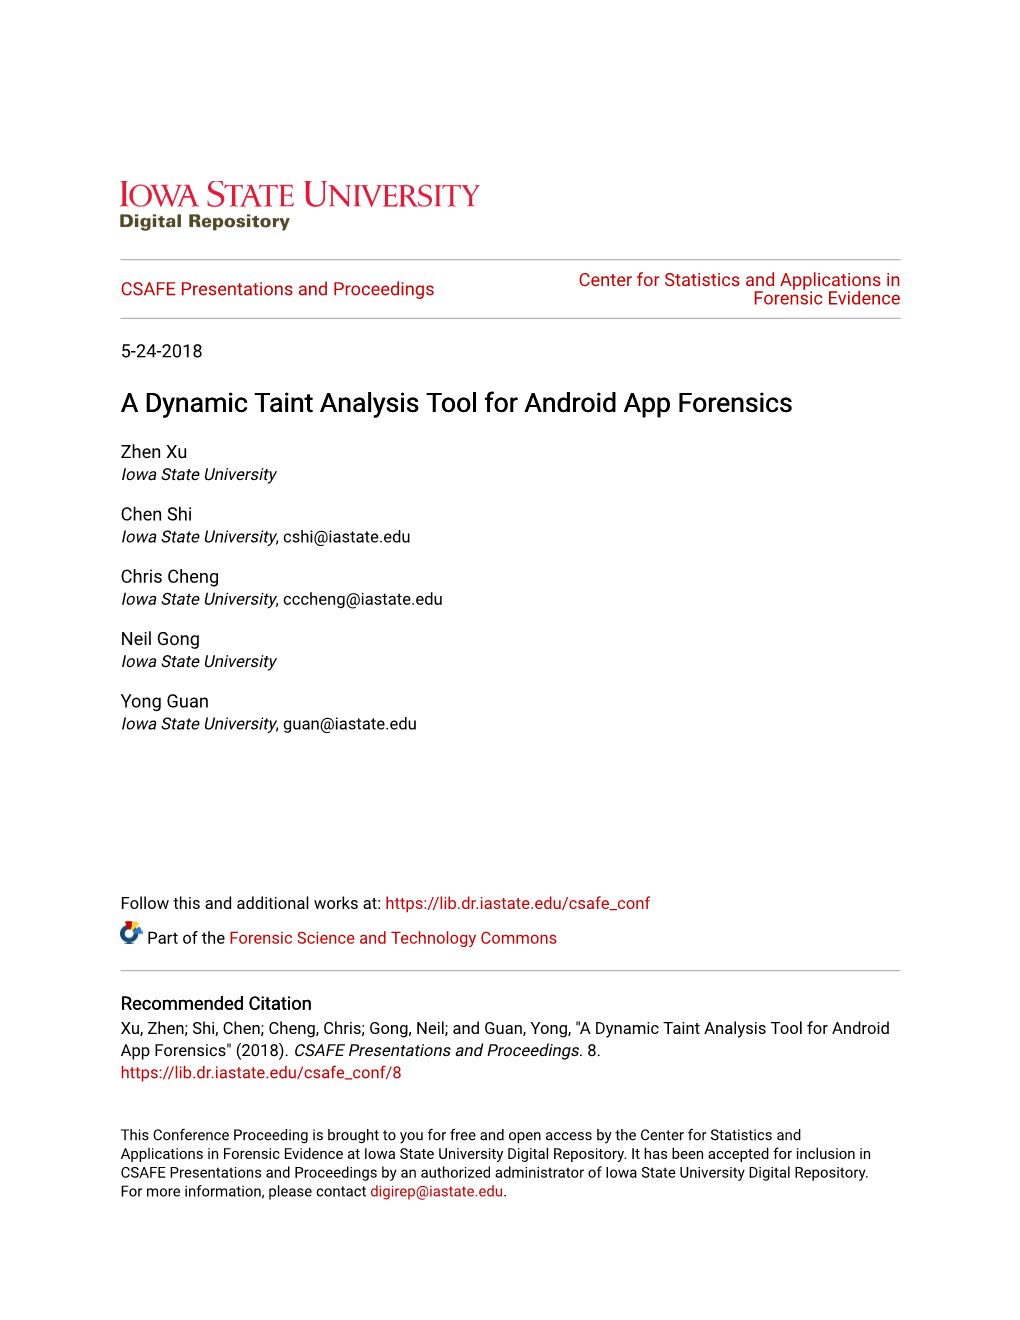 A Dynamic Taint Analysis Tool for Android App Forensics